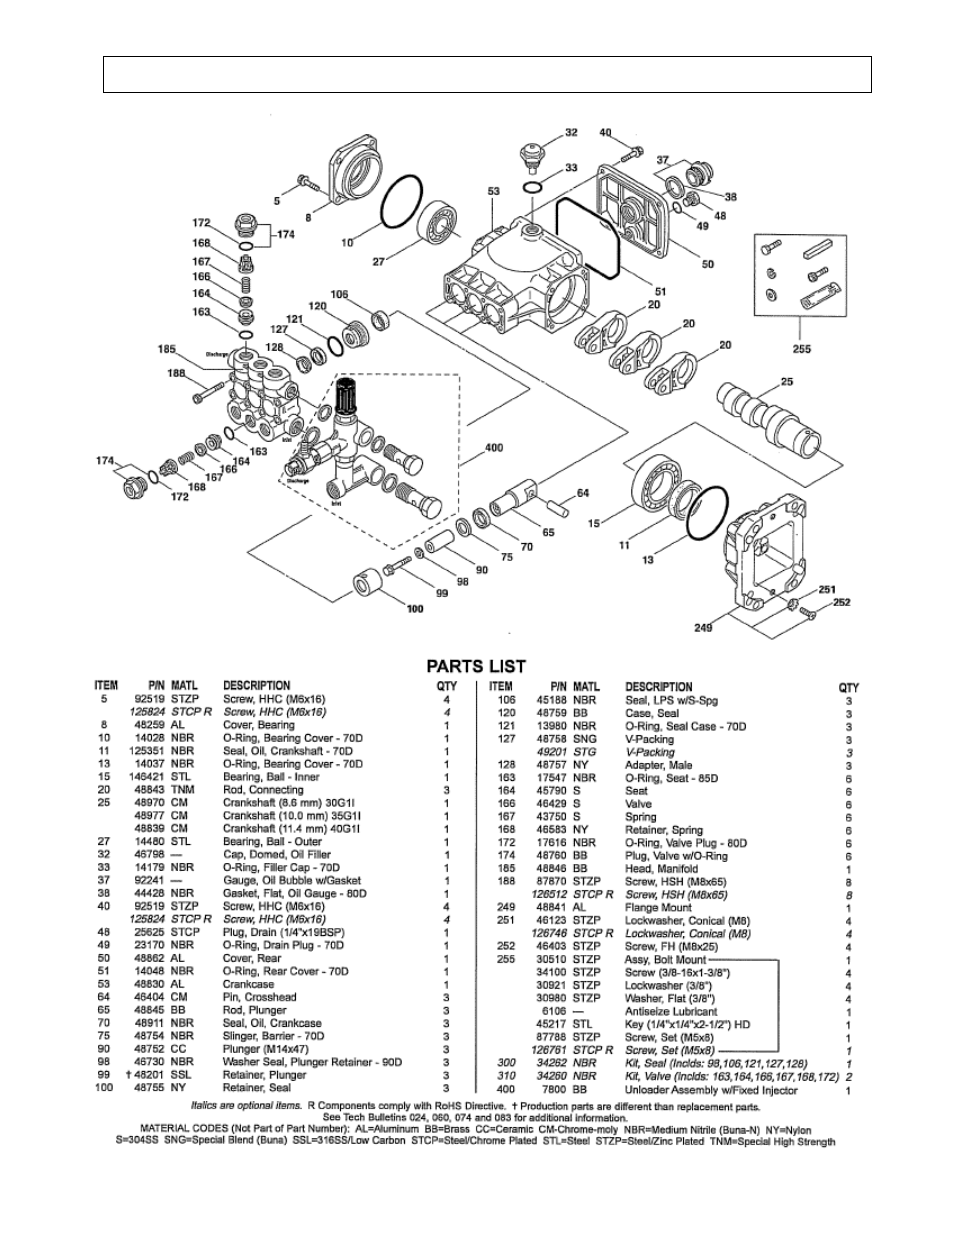 Cat 66dx pump breakdown | Northern Industrial Tools M1578112A User Manual | Page 34 / 40